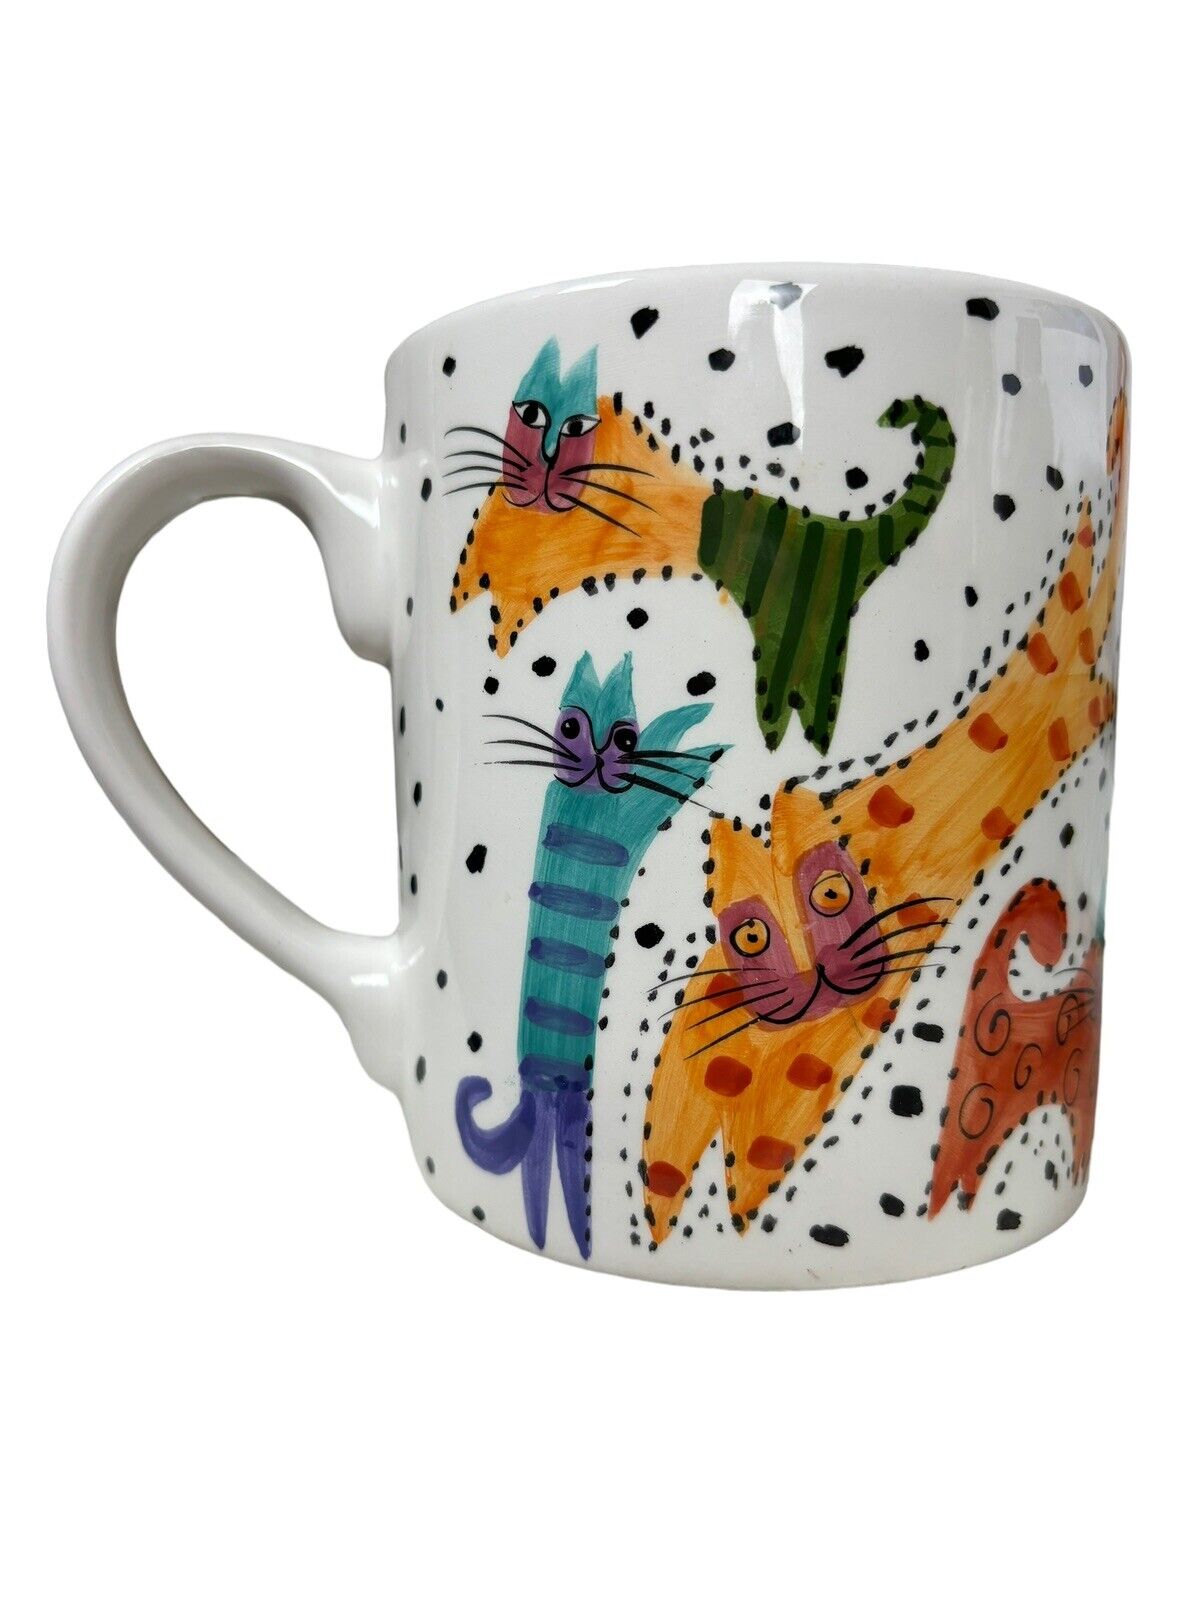 1991 Vtg Laurel Burch Spotted Leaping Jumping Cats Coffee Mug